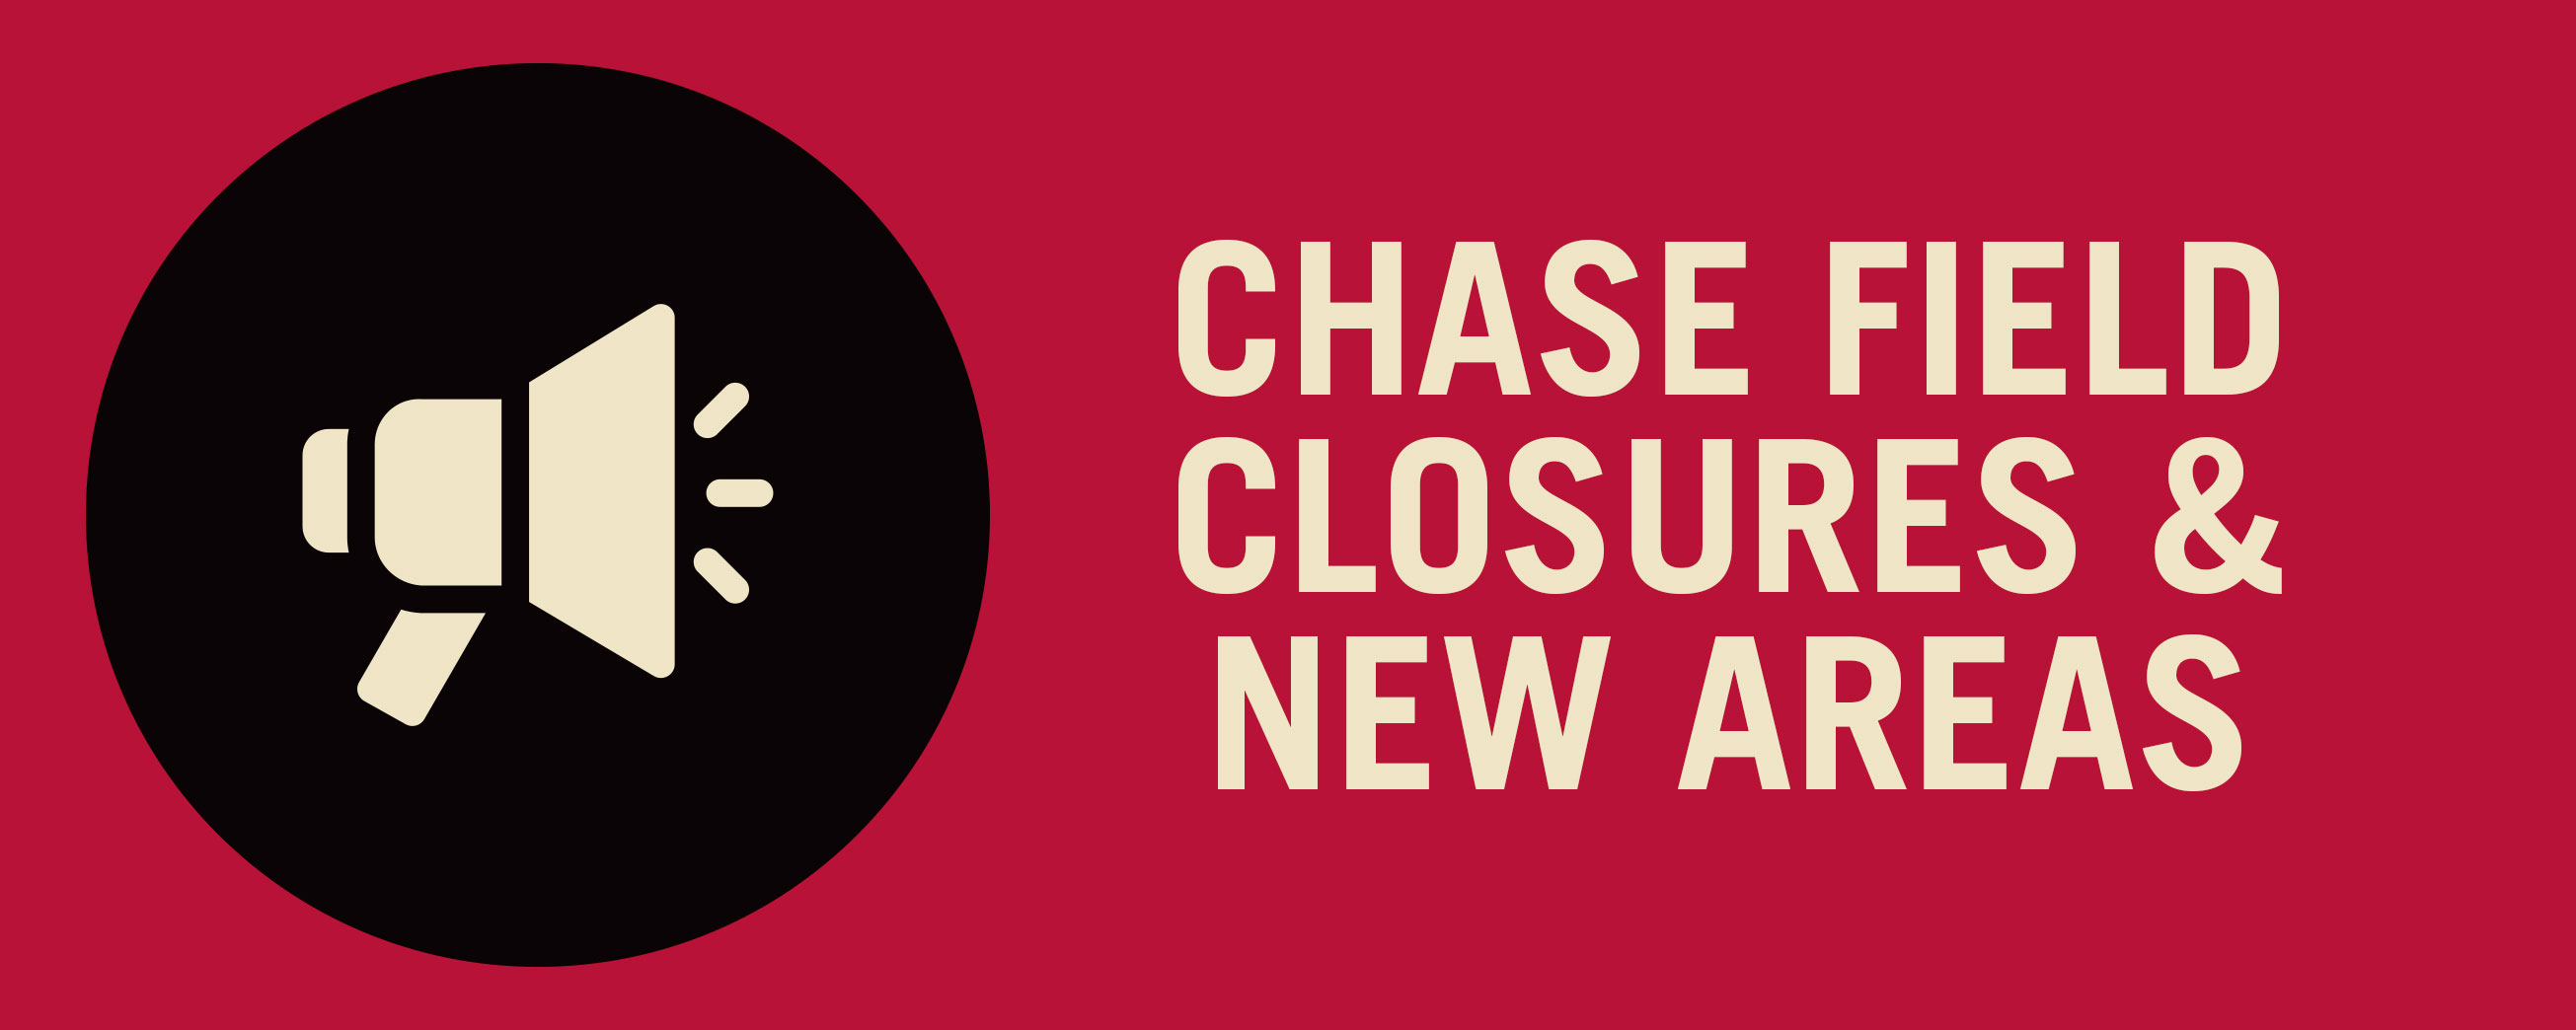 Chase Field Closures & New Areas